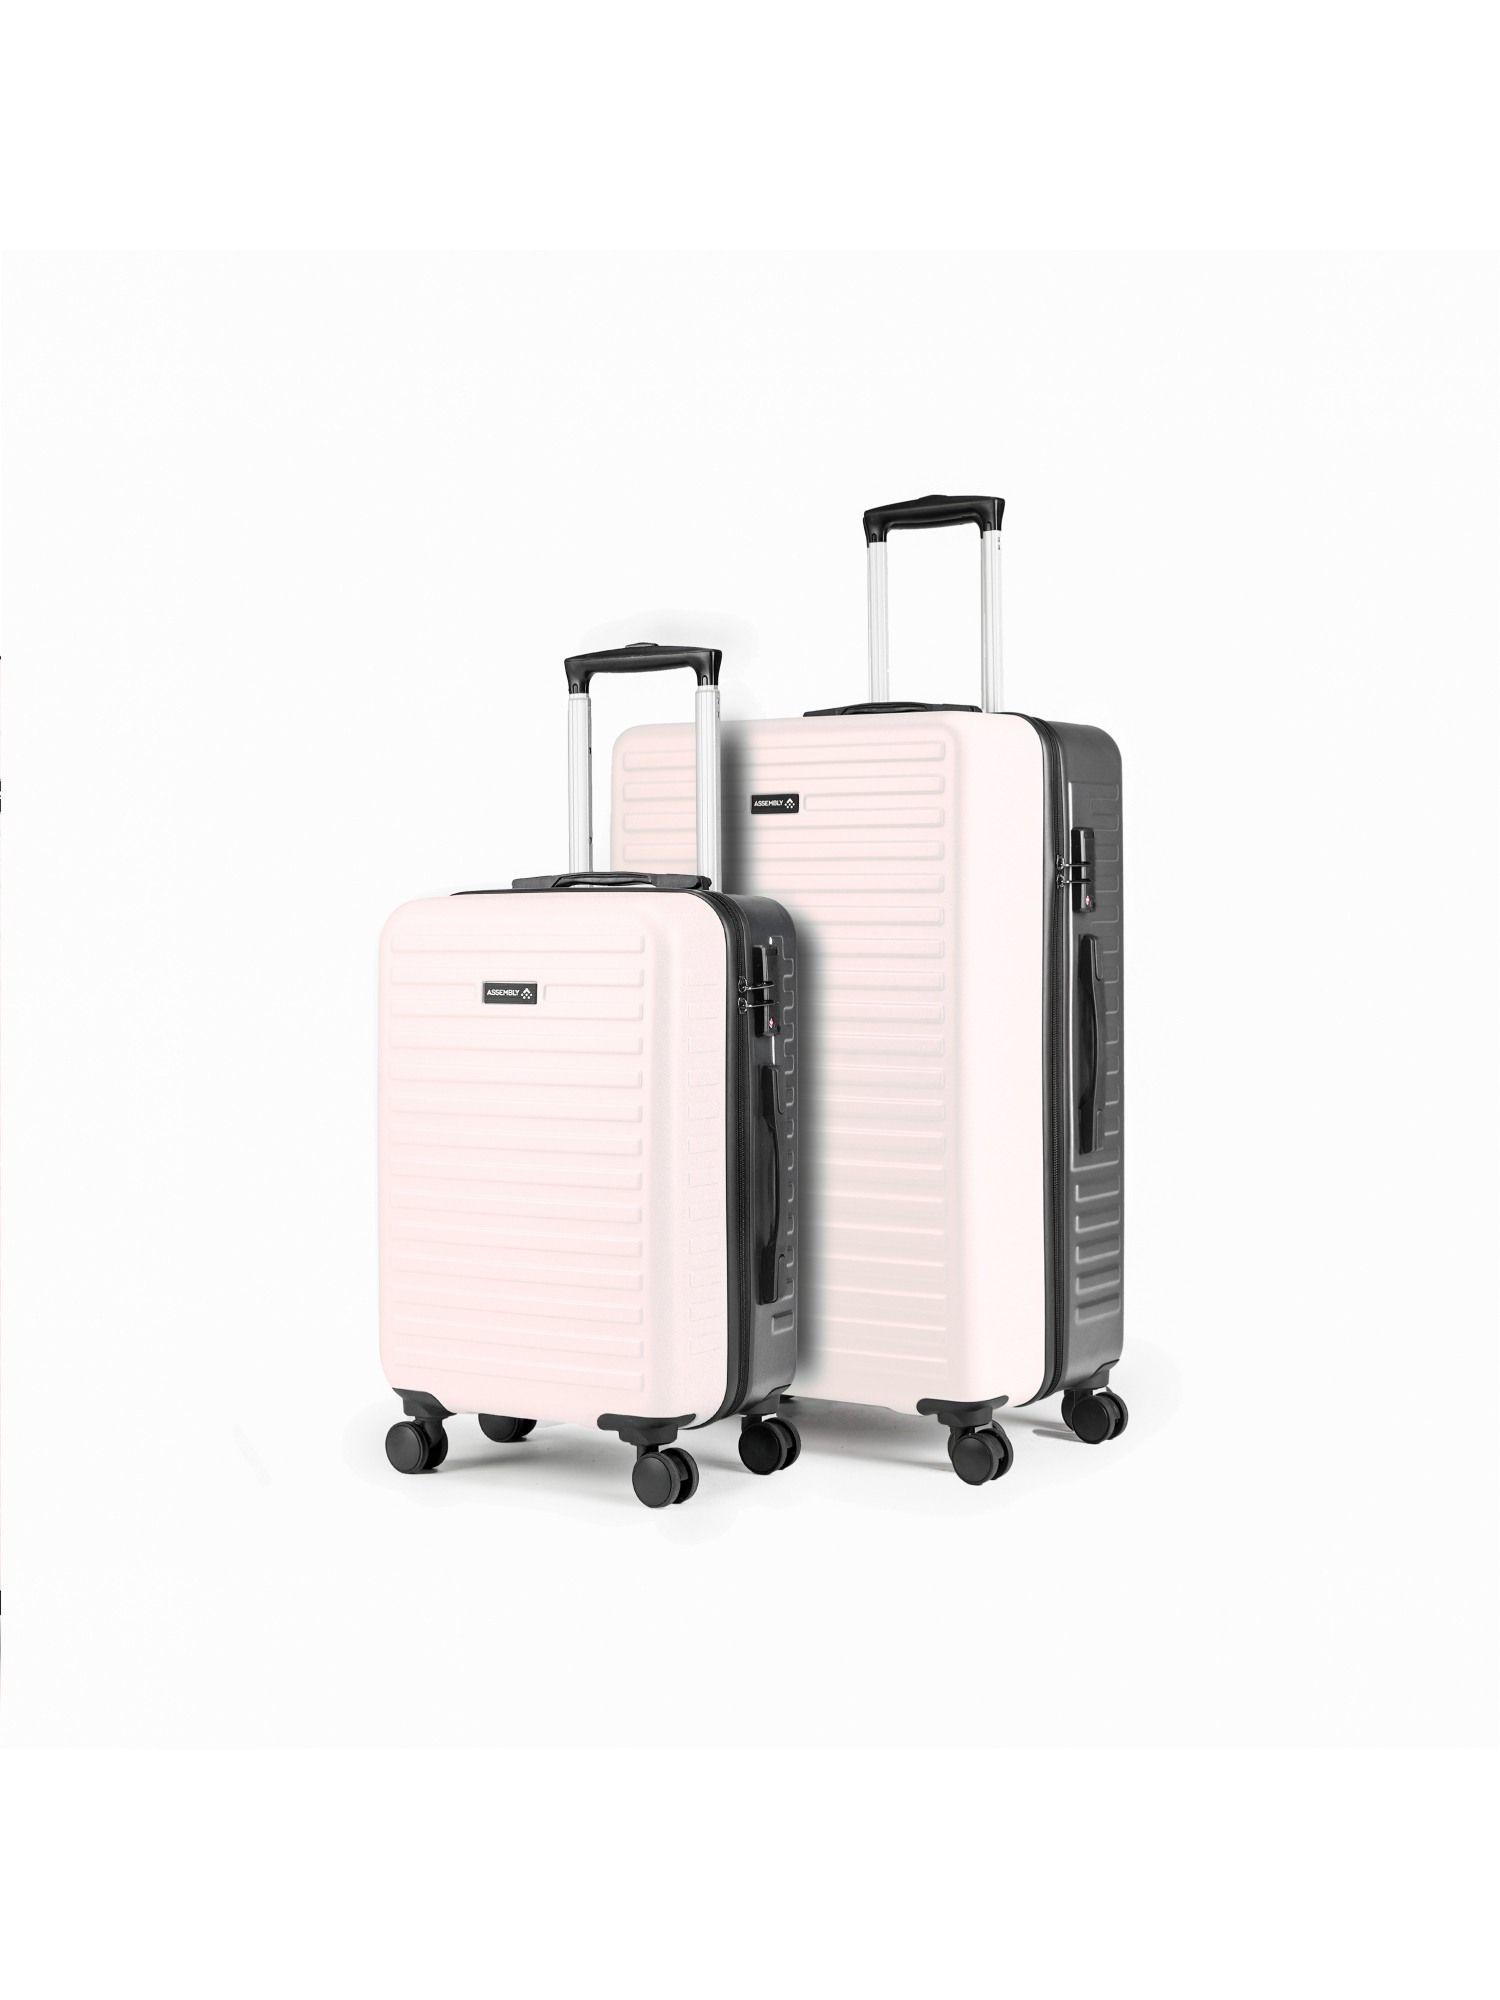 large check - in luggage & cabin trolley set of 2 - ivory & grey